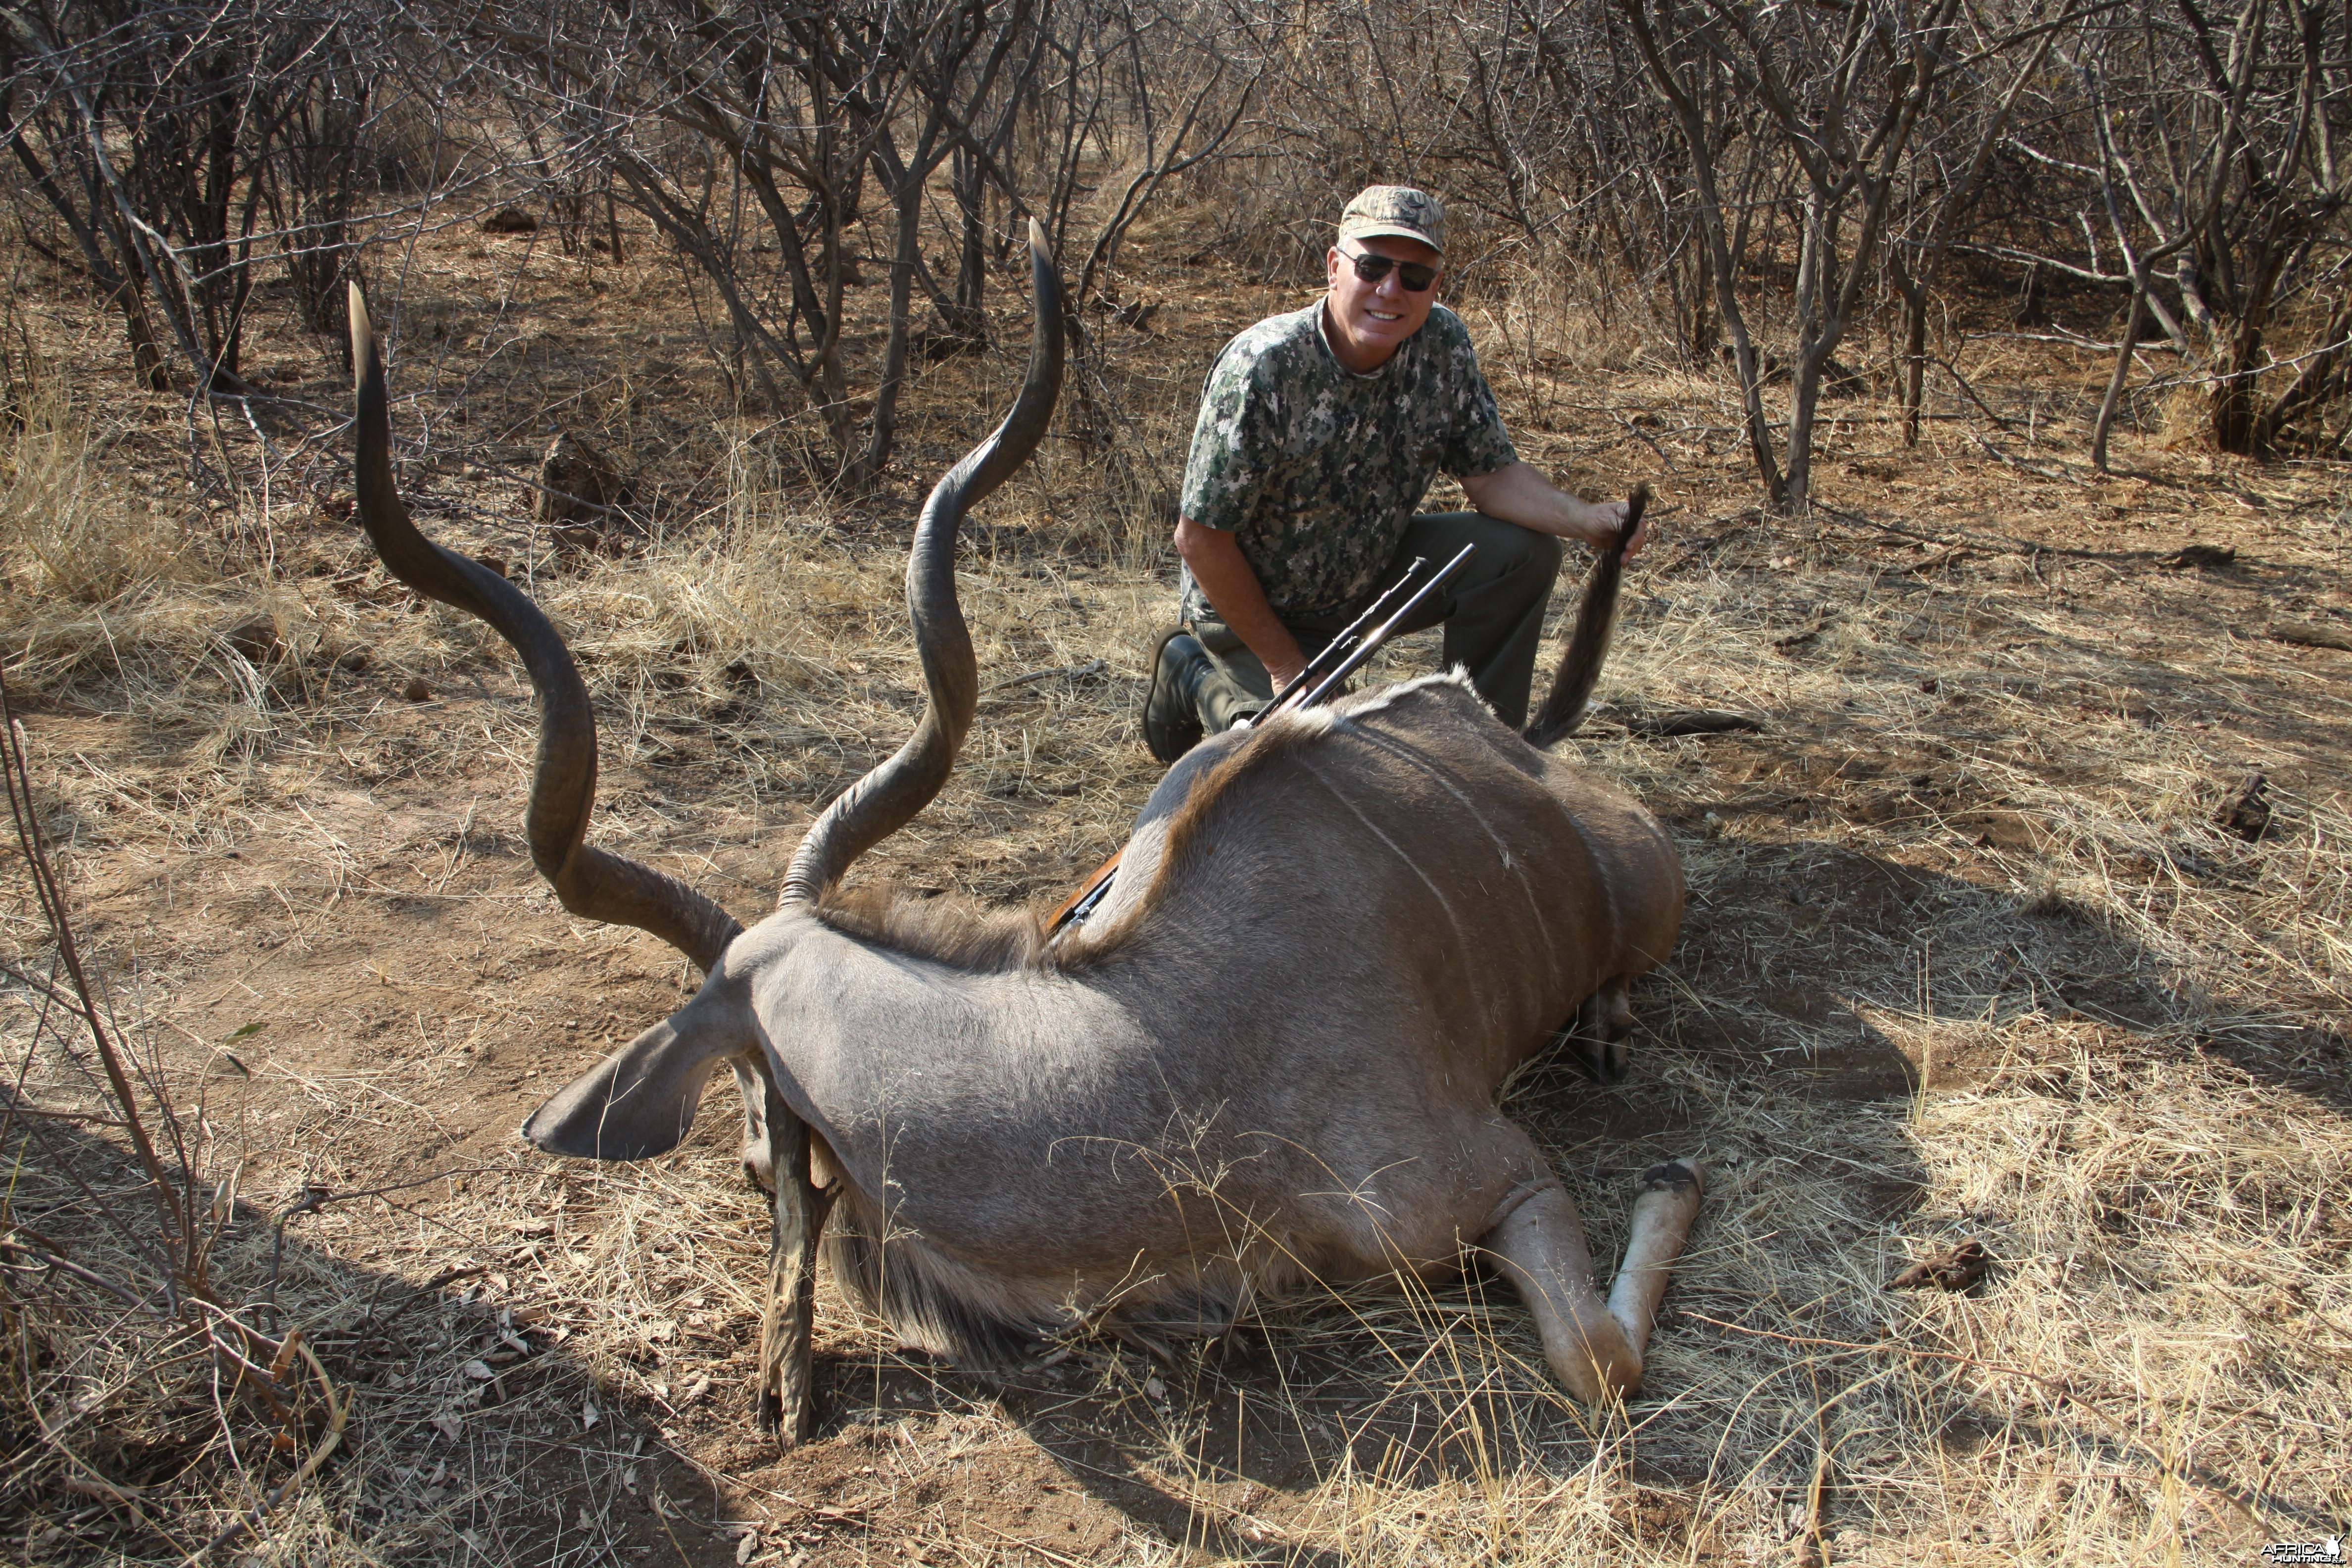 Greater Kudu hunted with Ozondjahe Hunting Safaris in Namibia